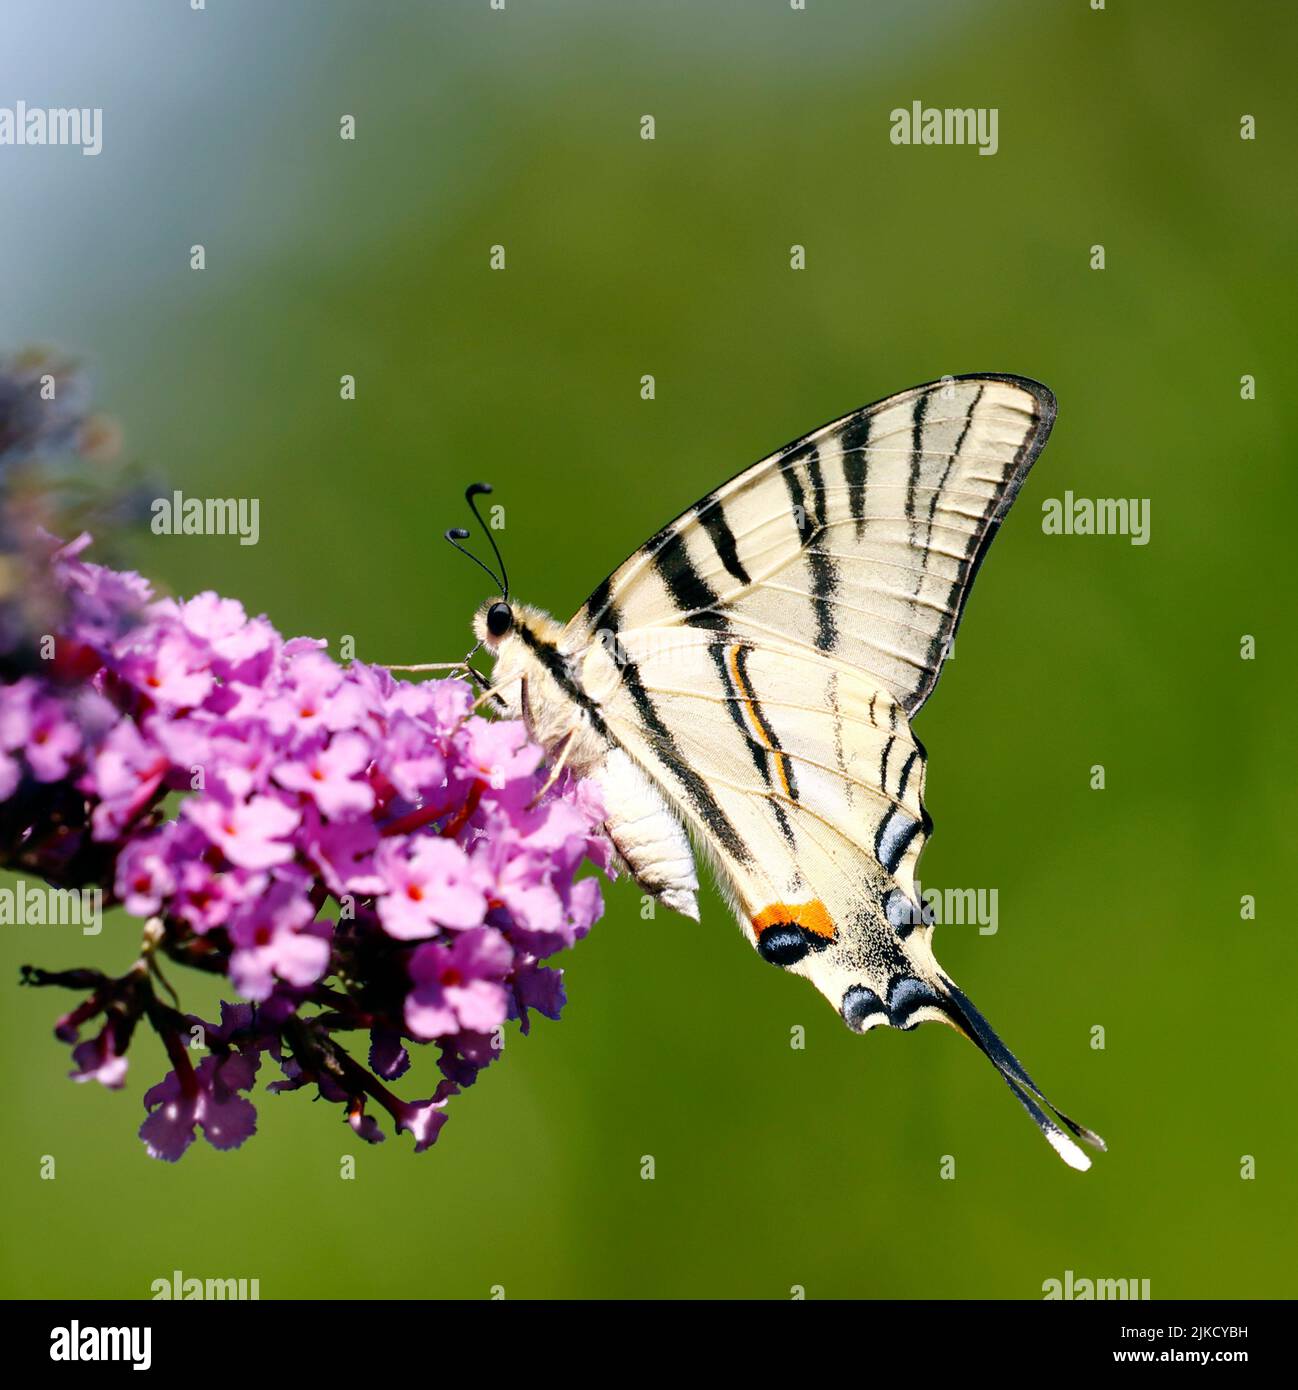 A butterfly, Iphiclides podalirius, sits on the blossoms of Buddleia Stock Photo